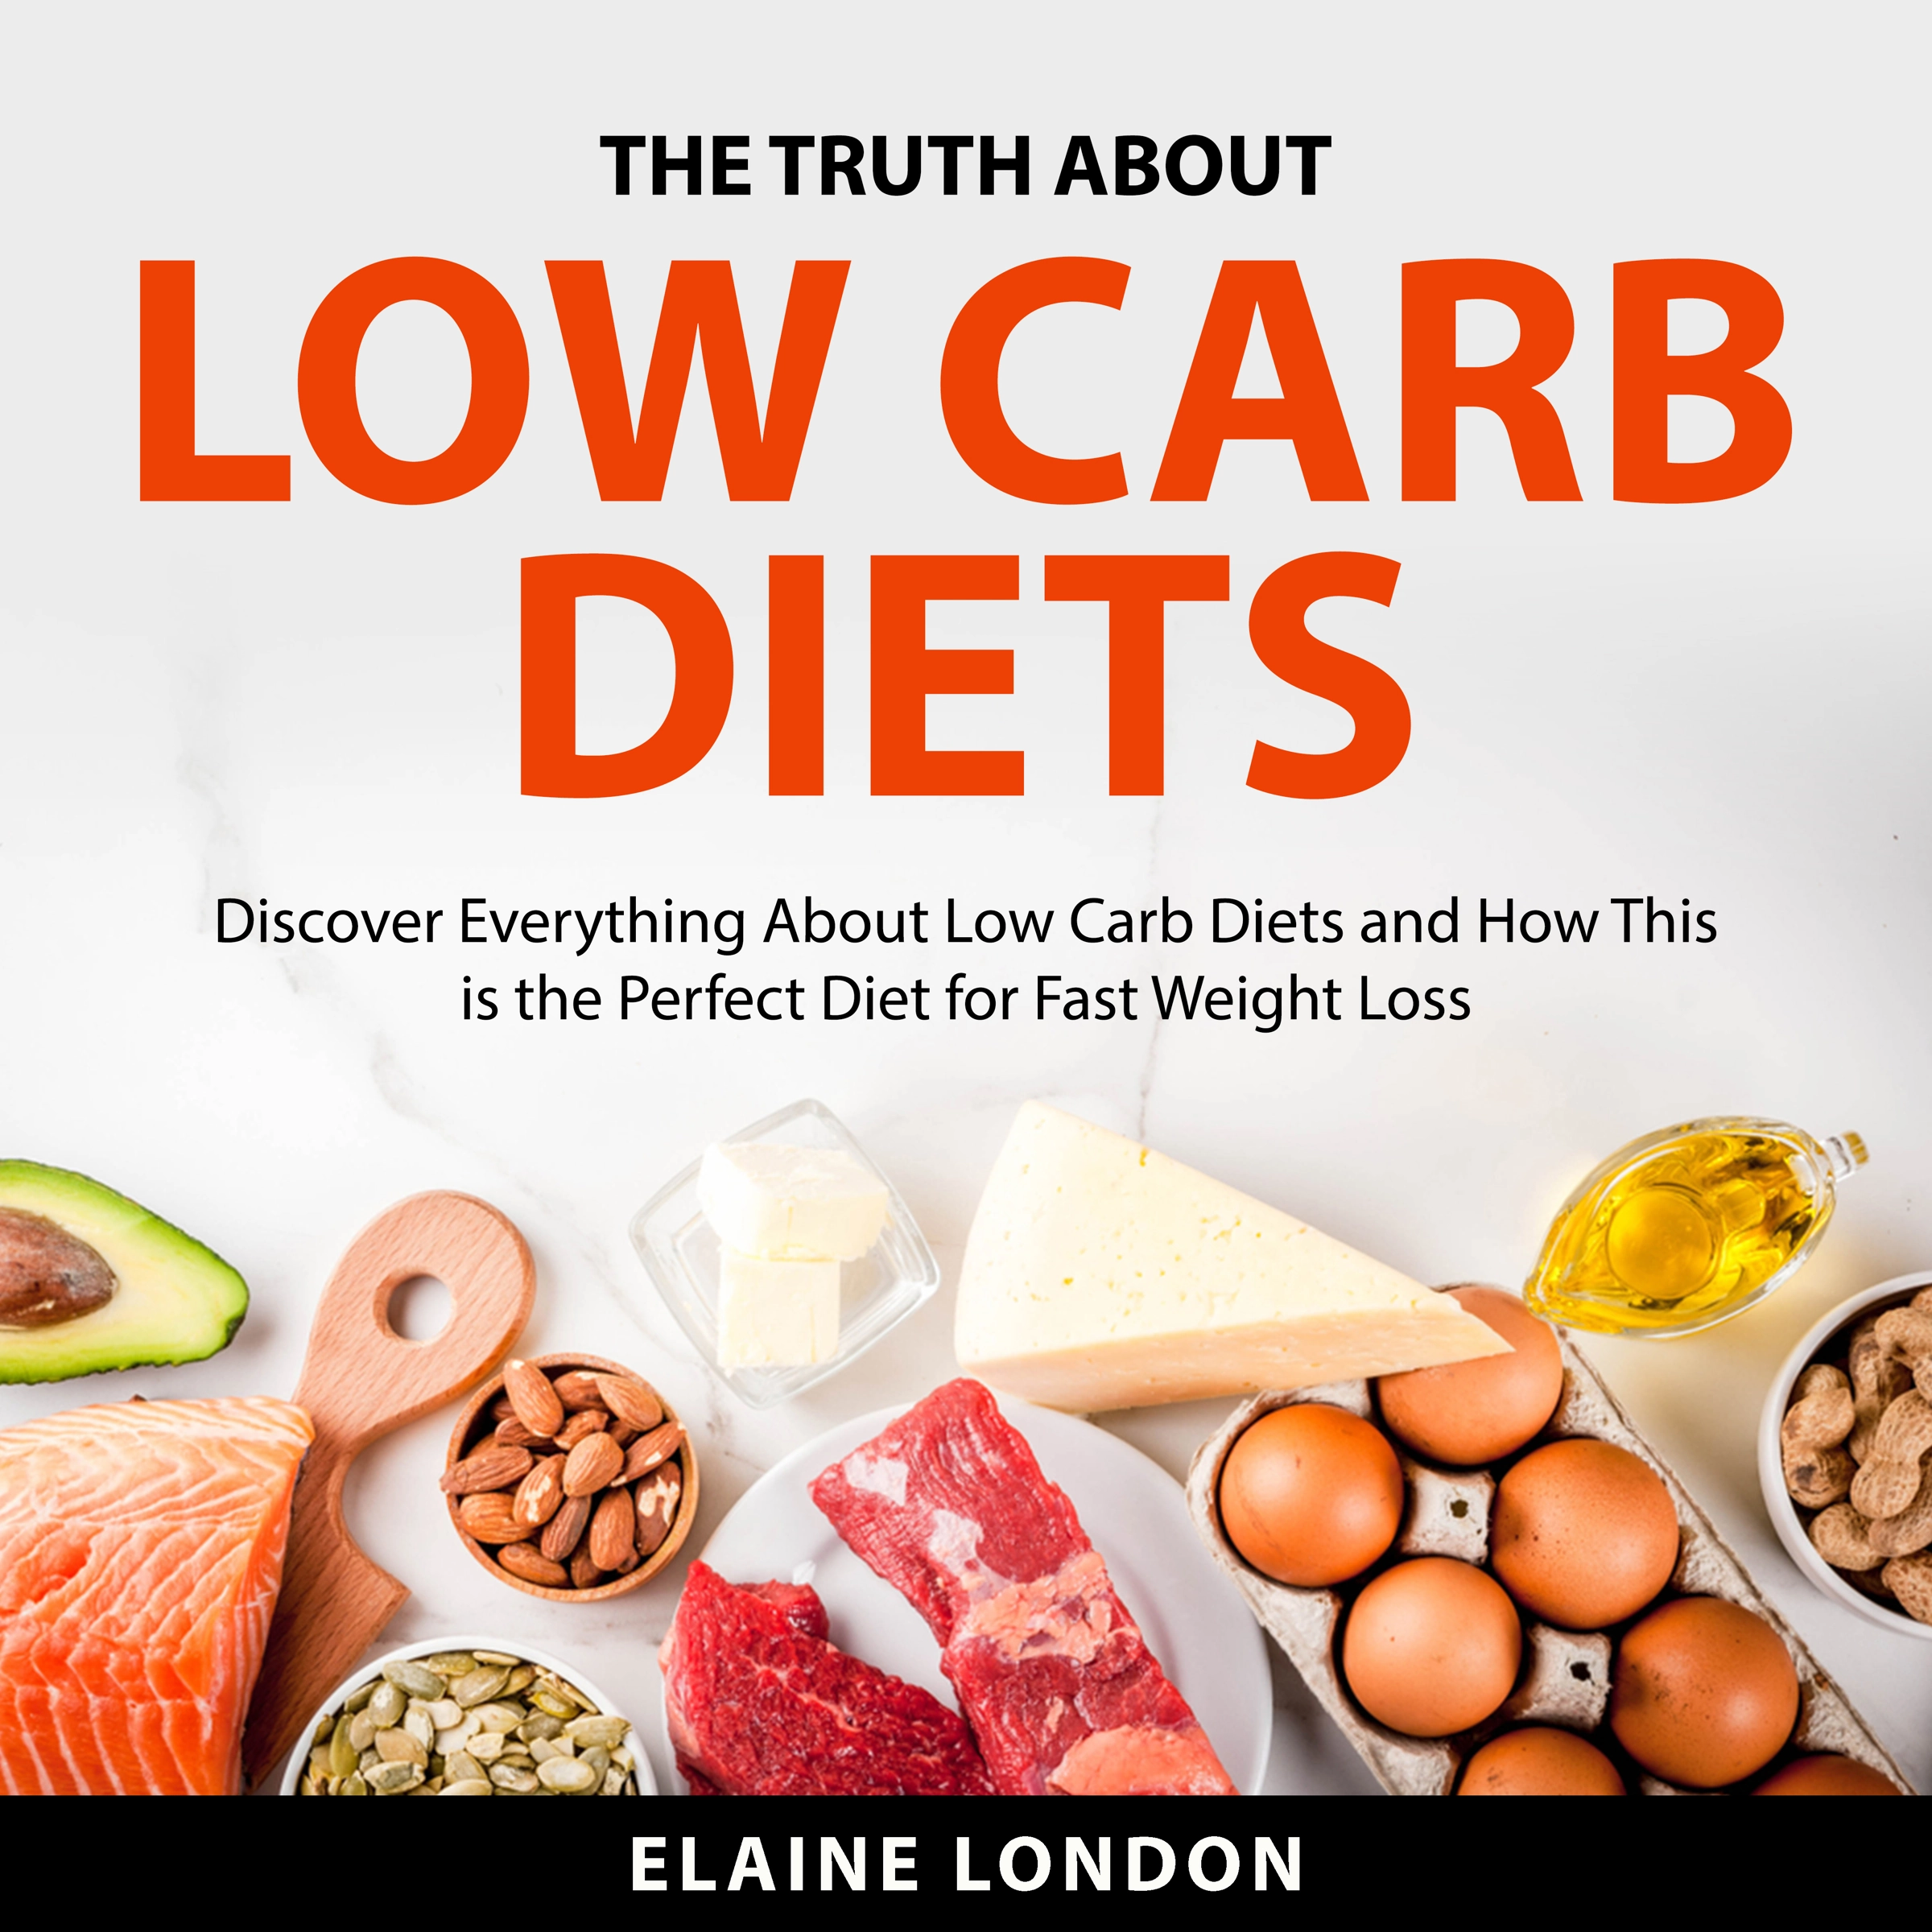 The Truth About Low Carb Diets Audiobook by Elaine London